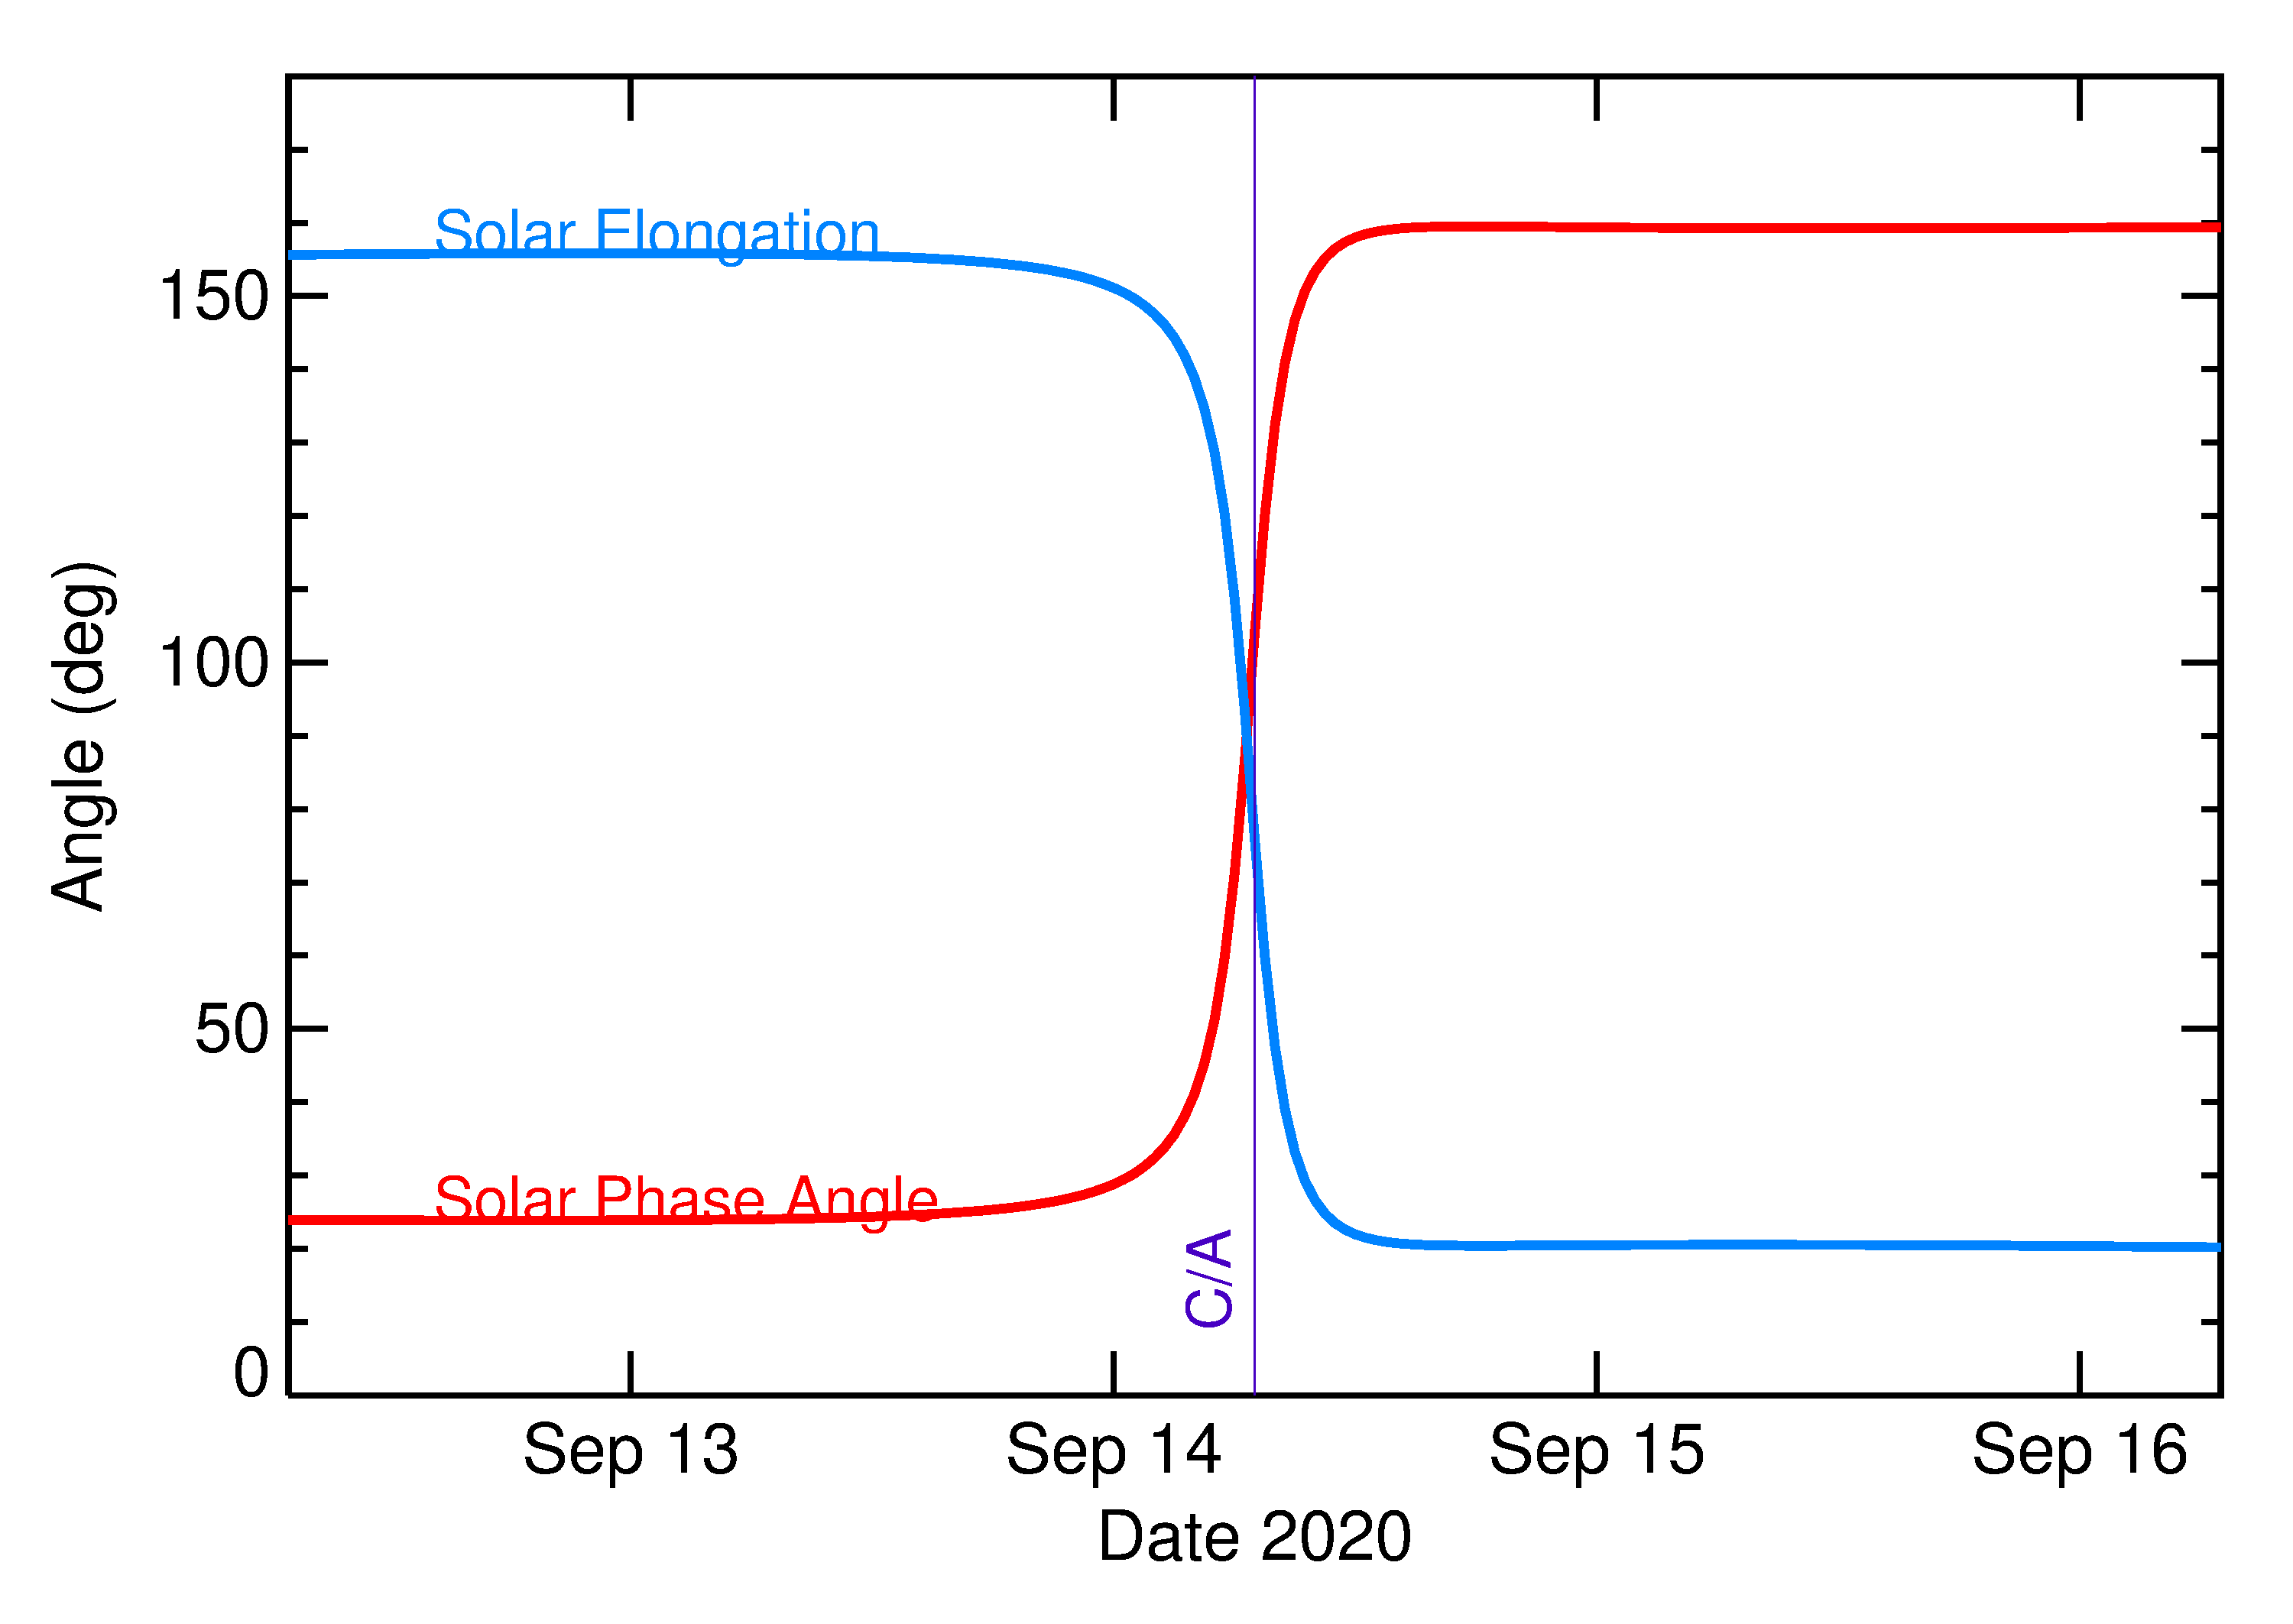 Solar Elongation and Solar Phase Angle of 2020 RF3 in the days around closest approach